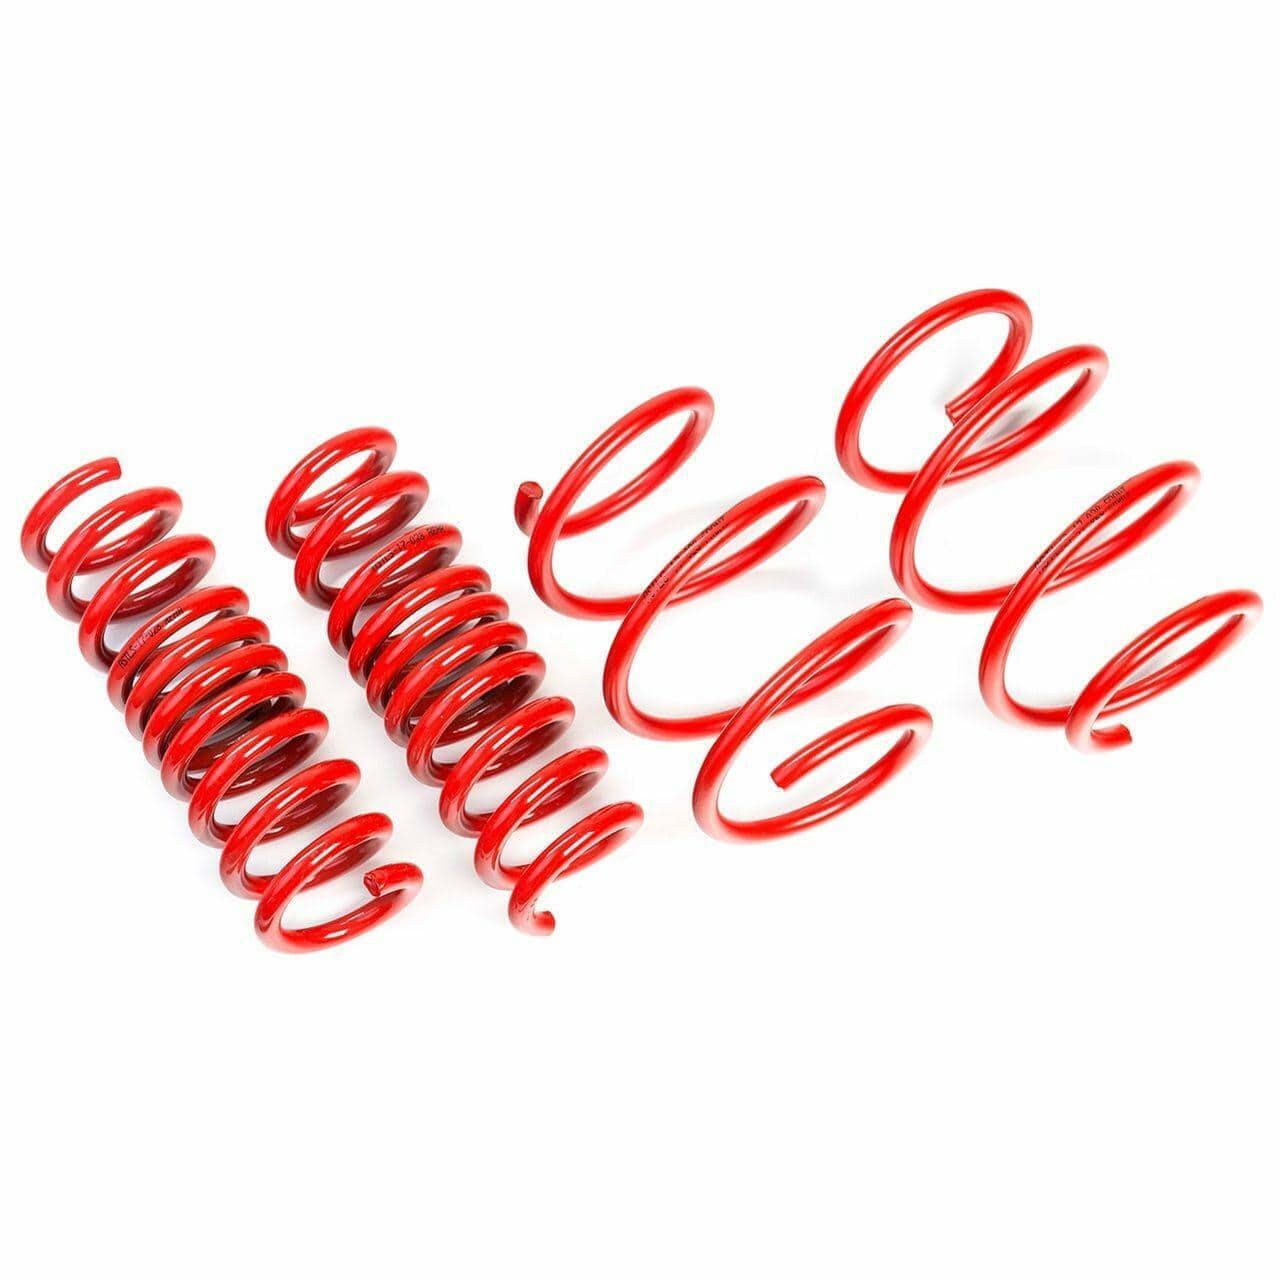 AST Suspension Lowering Springs (35MM/35MM) - 1986-1996 Audi 80 Quattro Coupe 4-5CYL (89) ASTLS-14-261